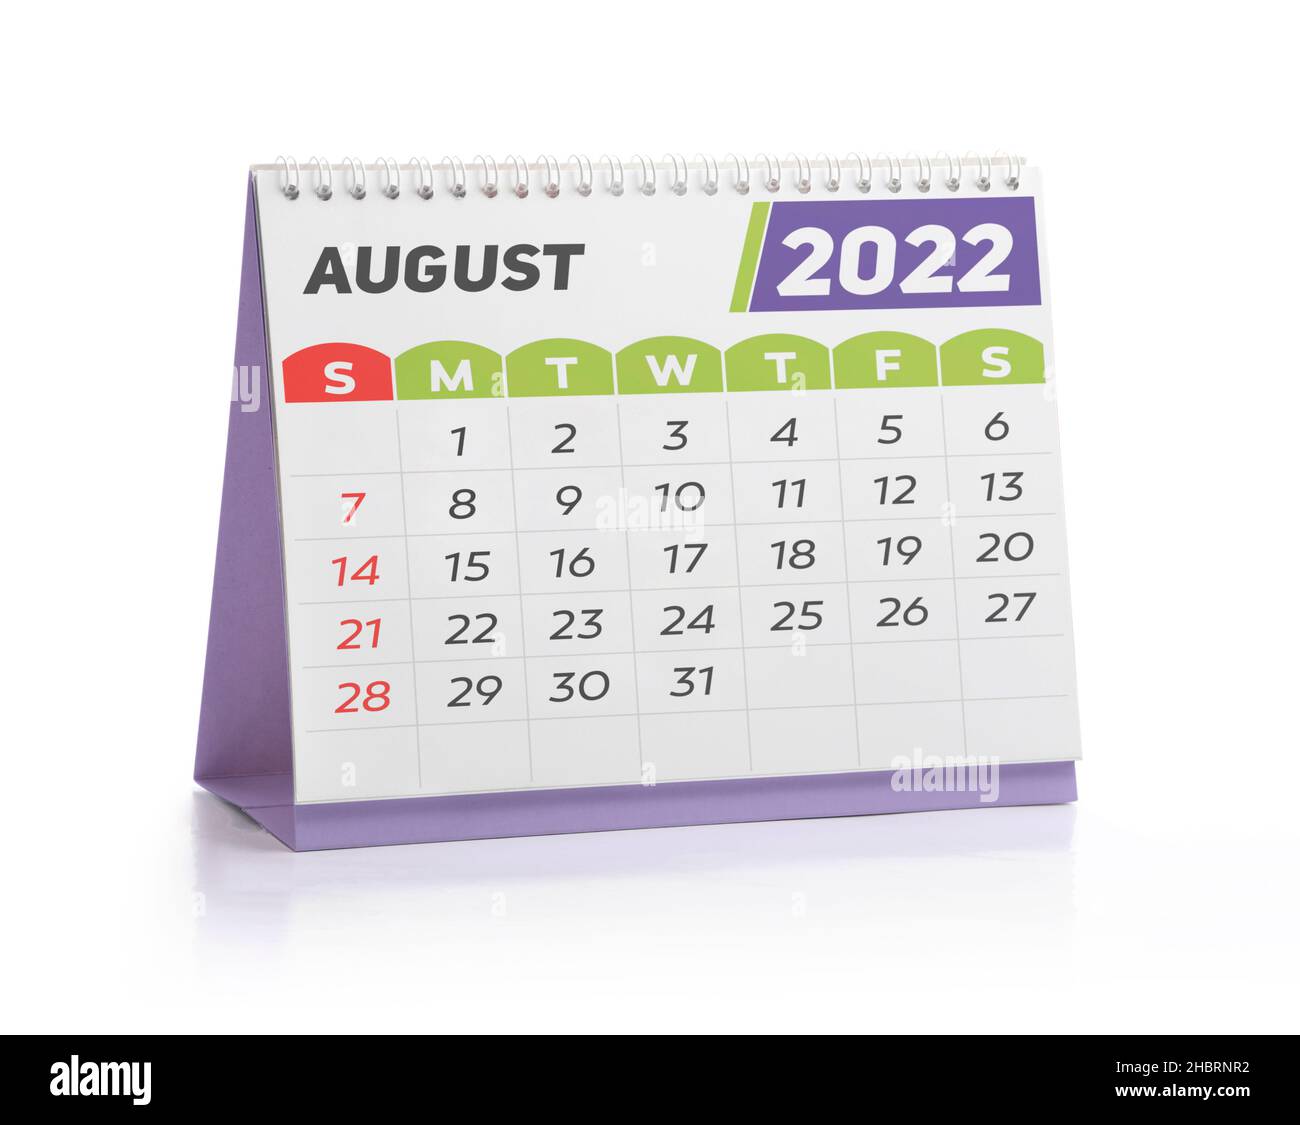 August White Office Calendar 2022 Isolated on White Stock Photo